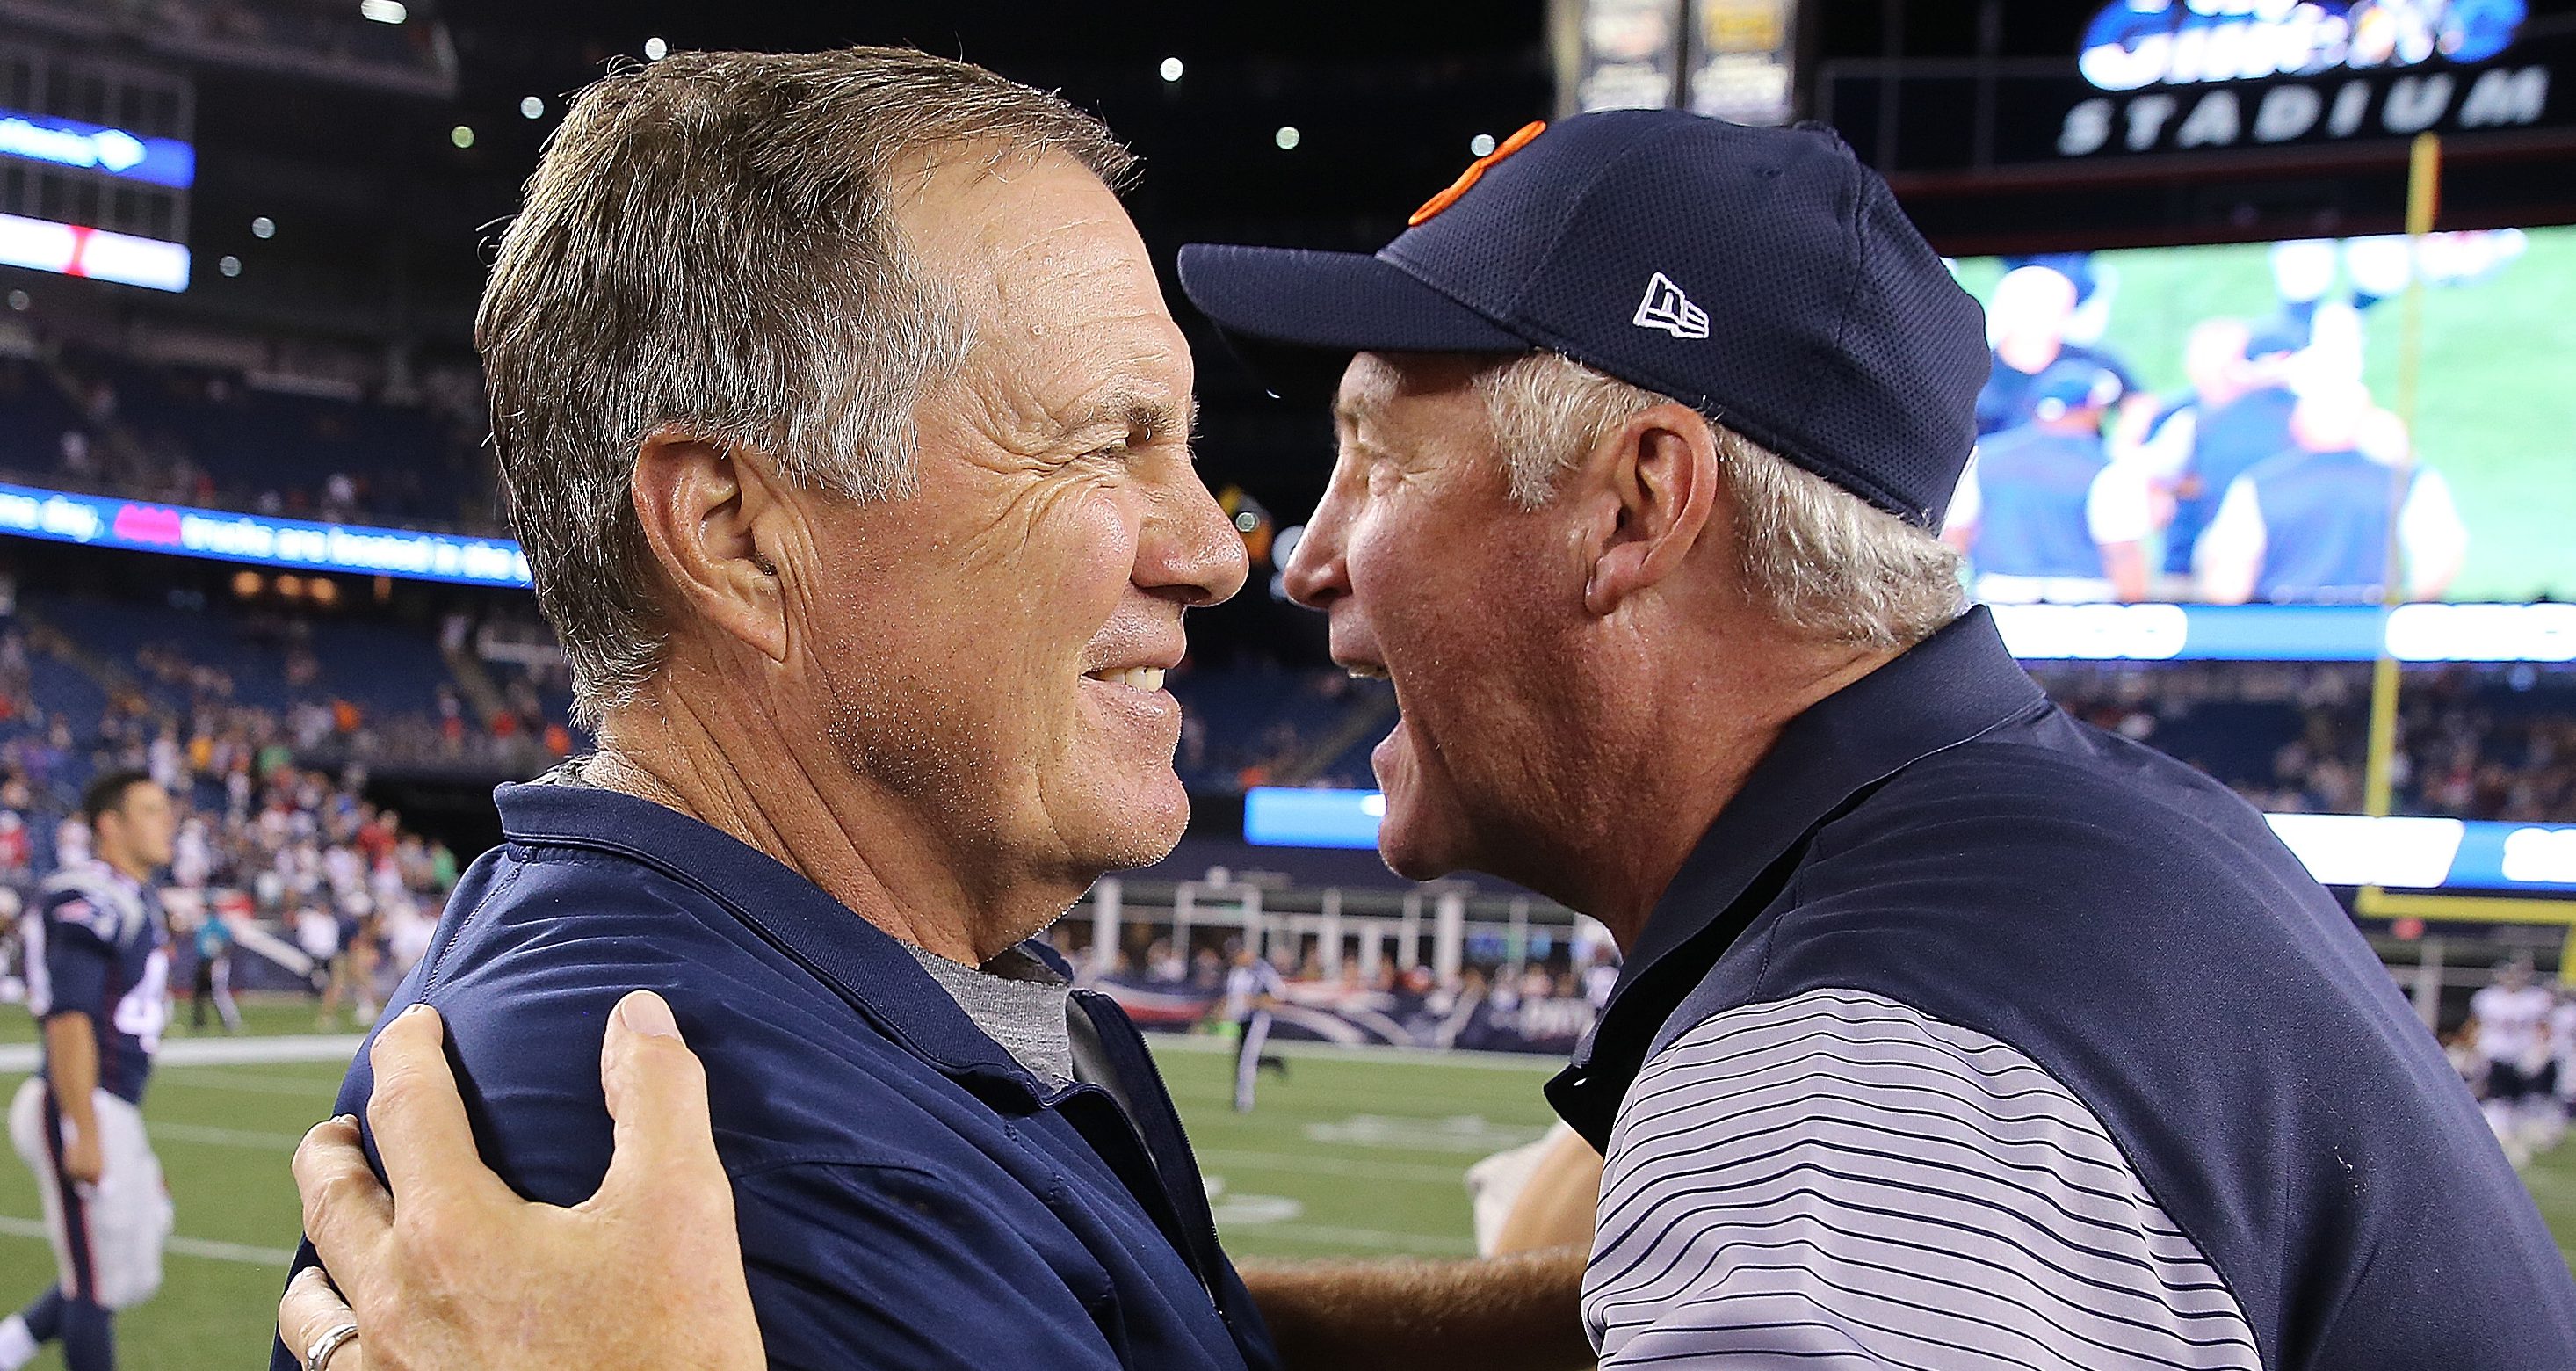 Bill Belichick and John Fox shake hands after their preseason game at Gillette Stadium in Foxboro, Massachusetts. (Photo by Jim Rogash/Getty Images)